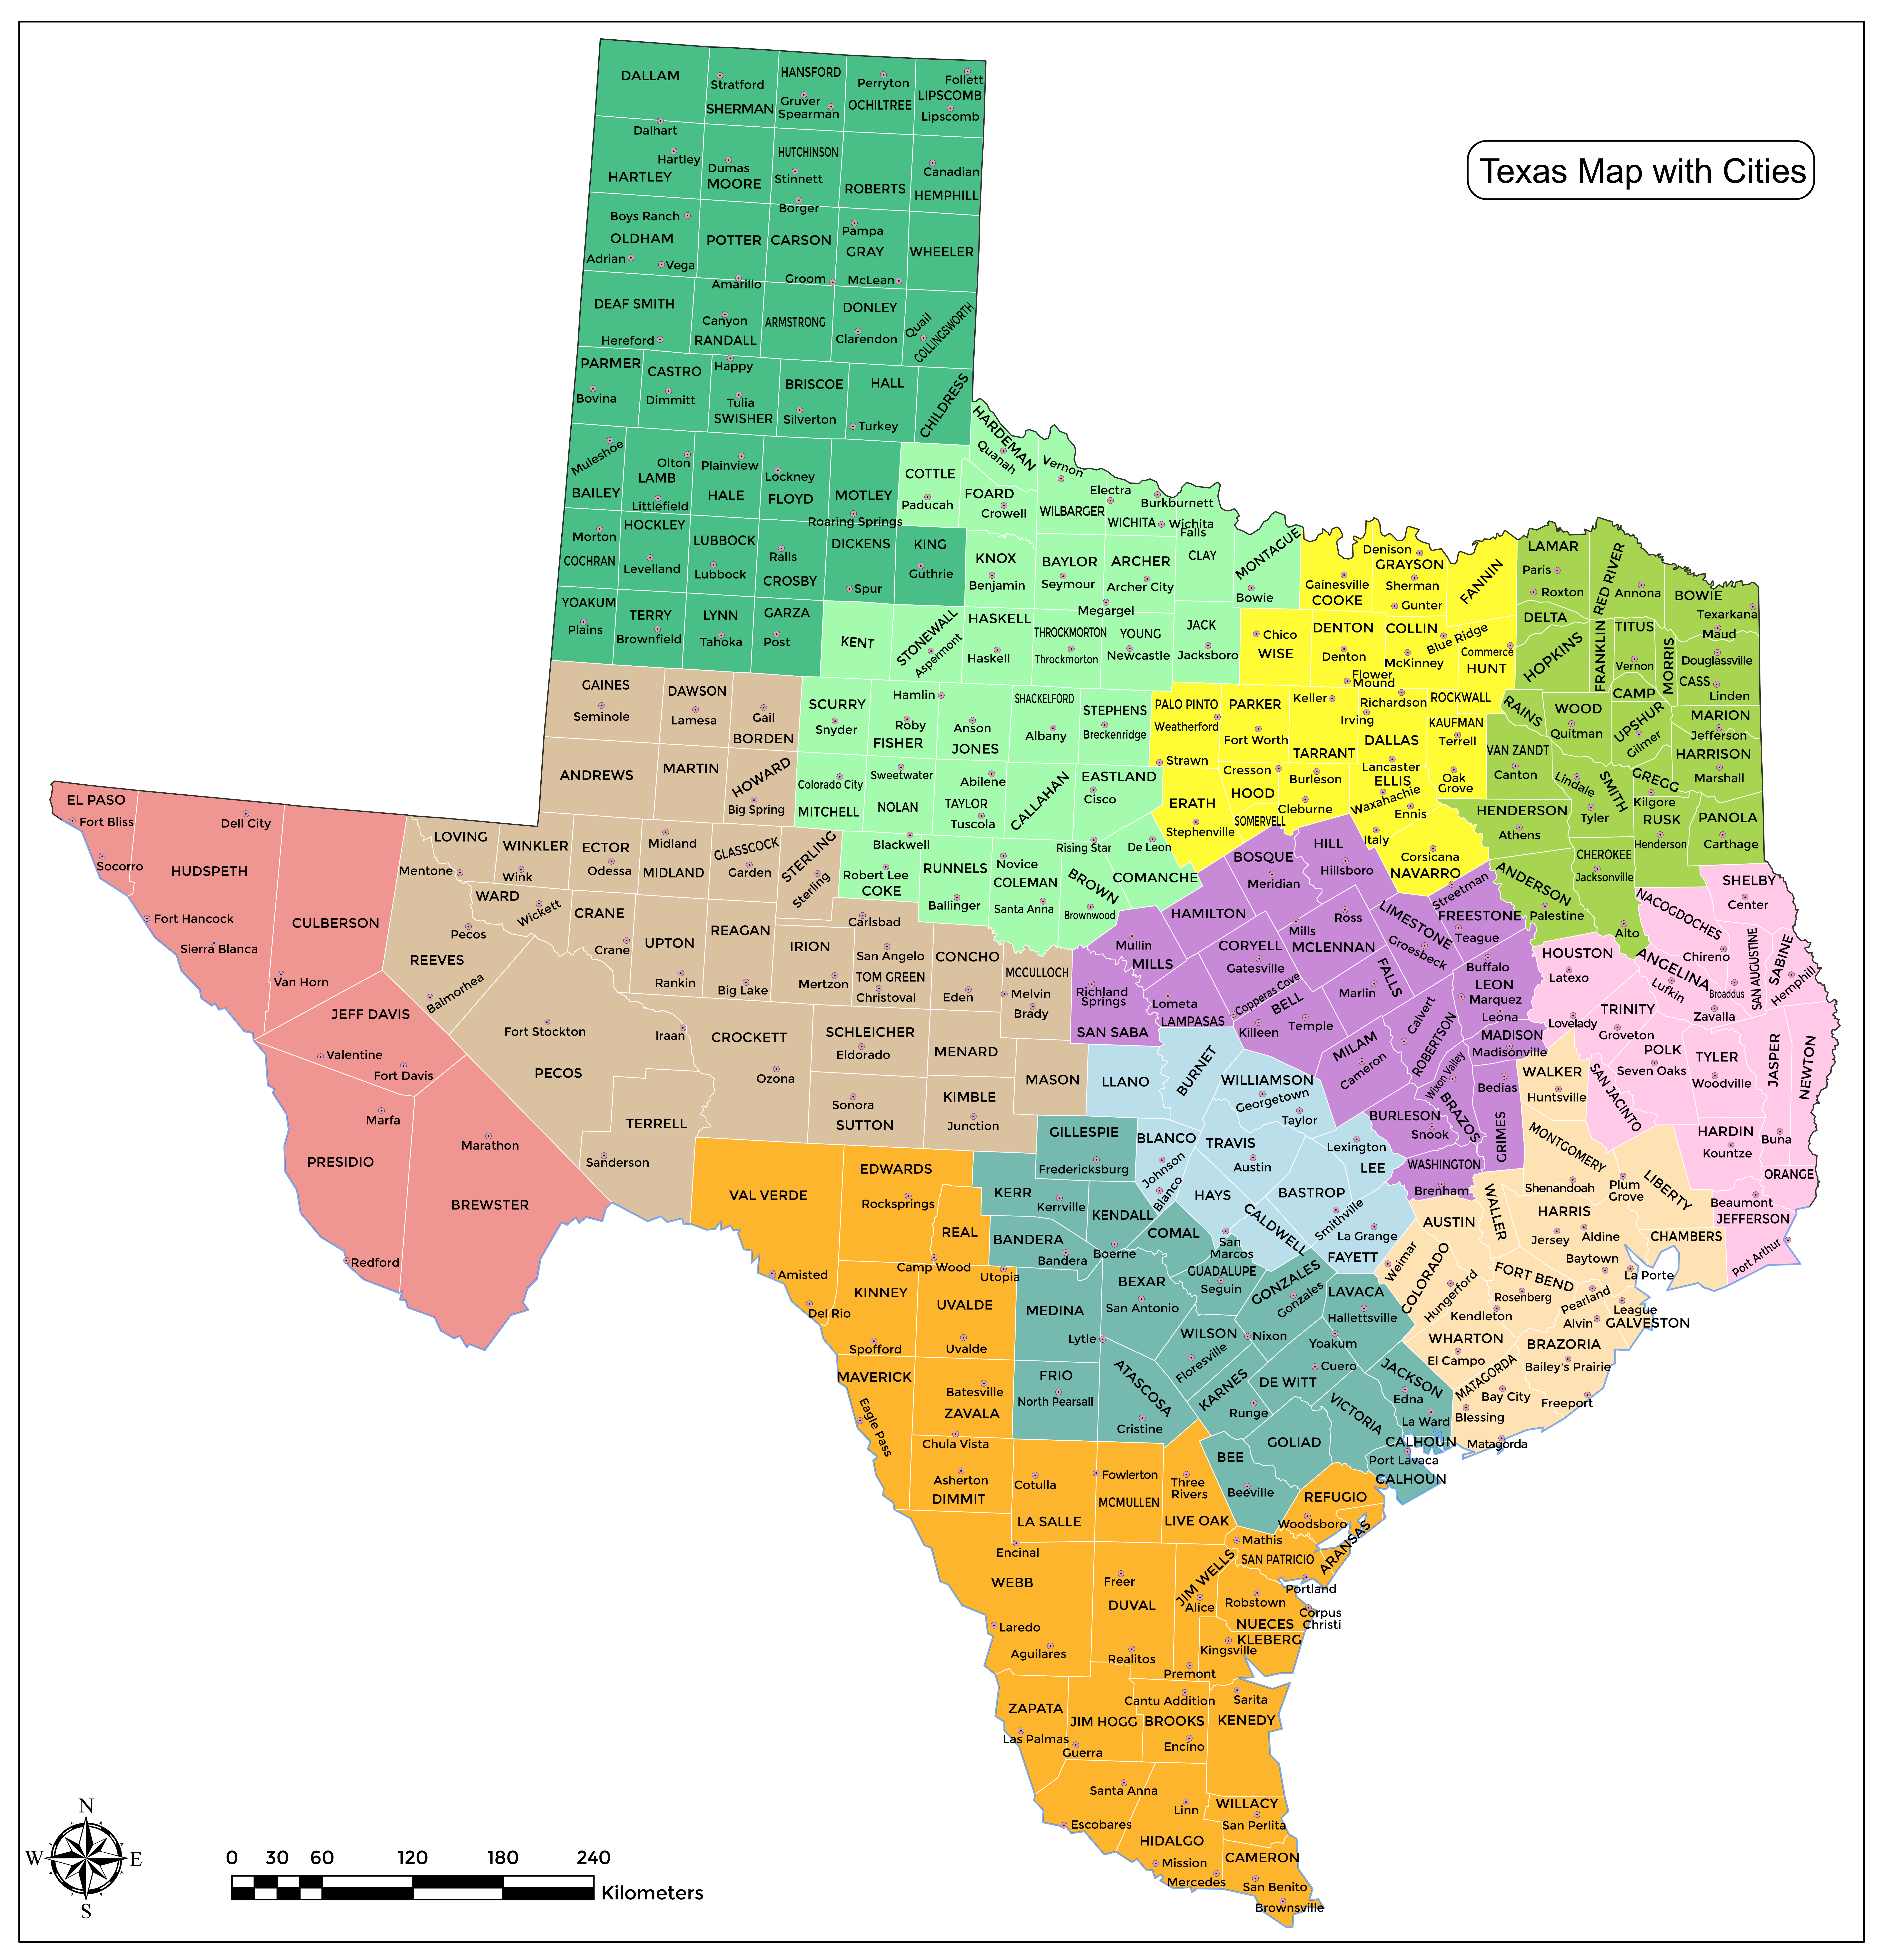 Texas Map with Cities X Large - Texas News, Places, Food, Recreation, and Life.